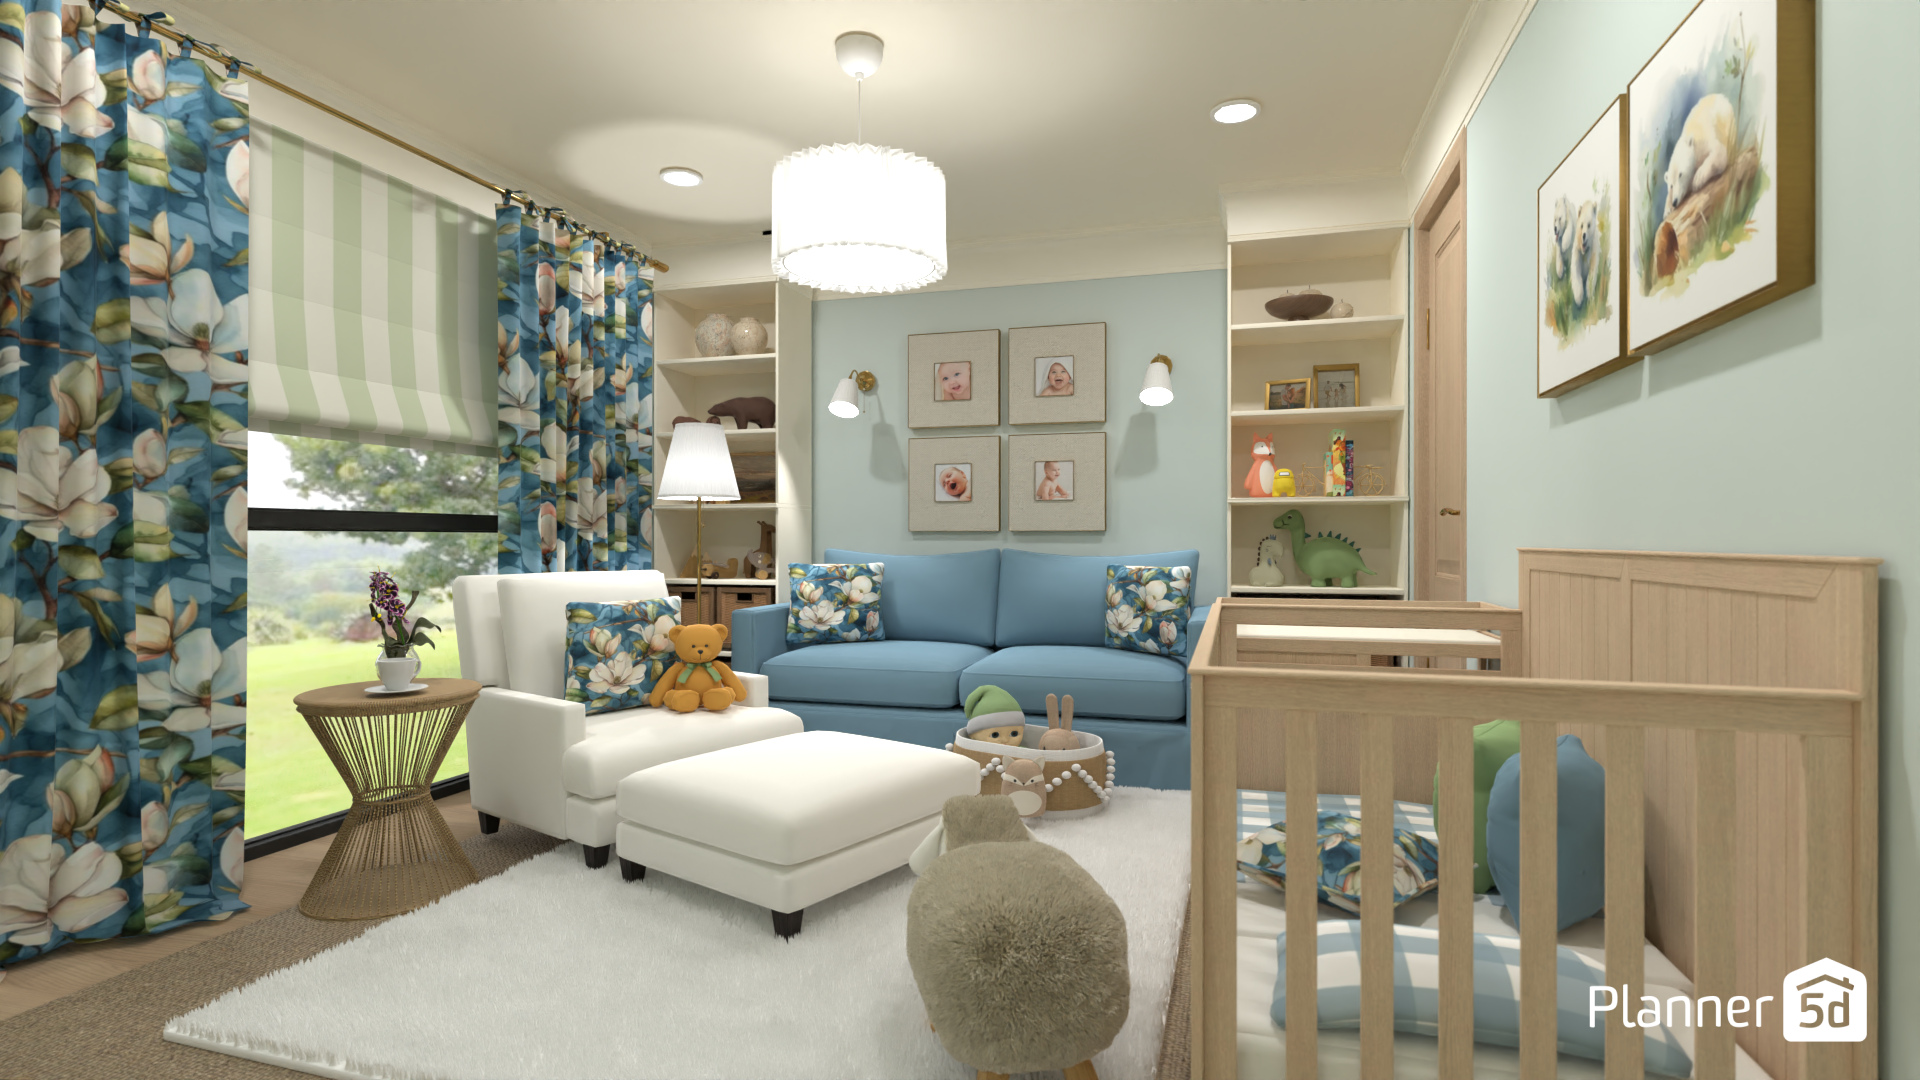 Nursery in SW paint colors 16391531 by Darina Doncheva image